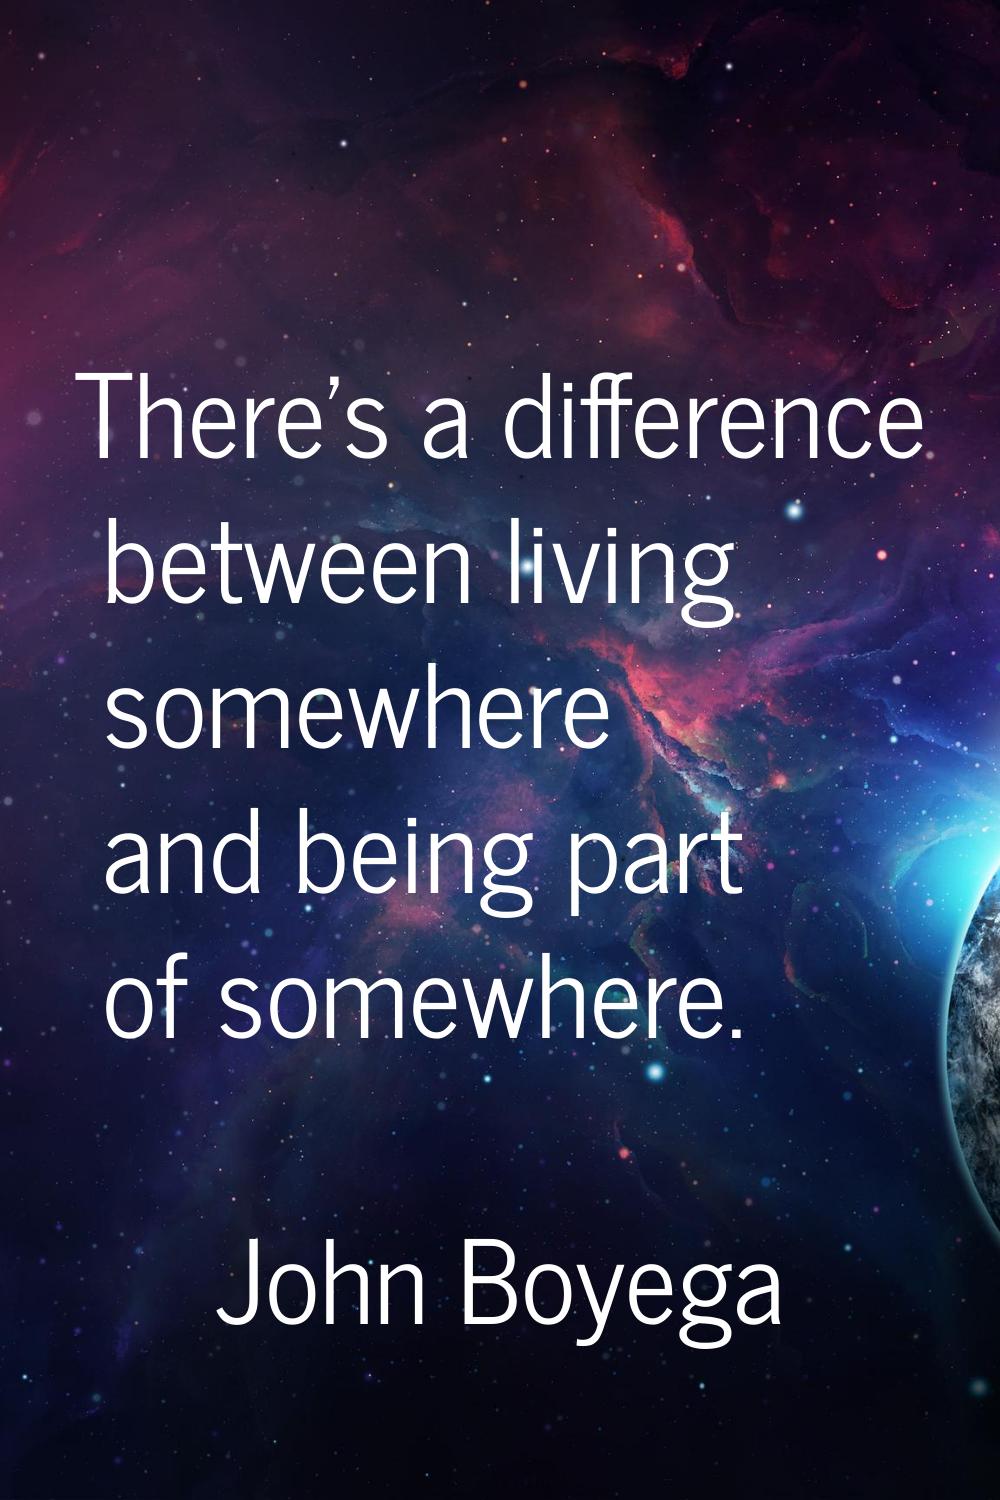 There's a difference between living somewhere and being part of somewhere.